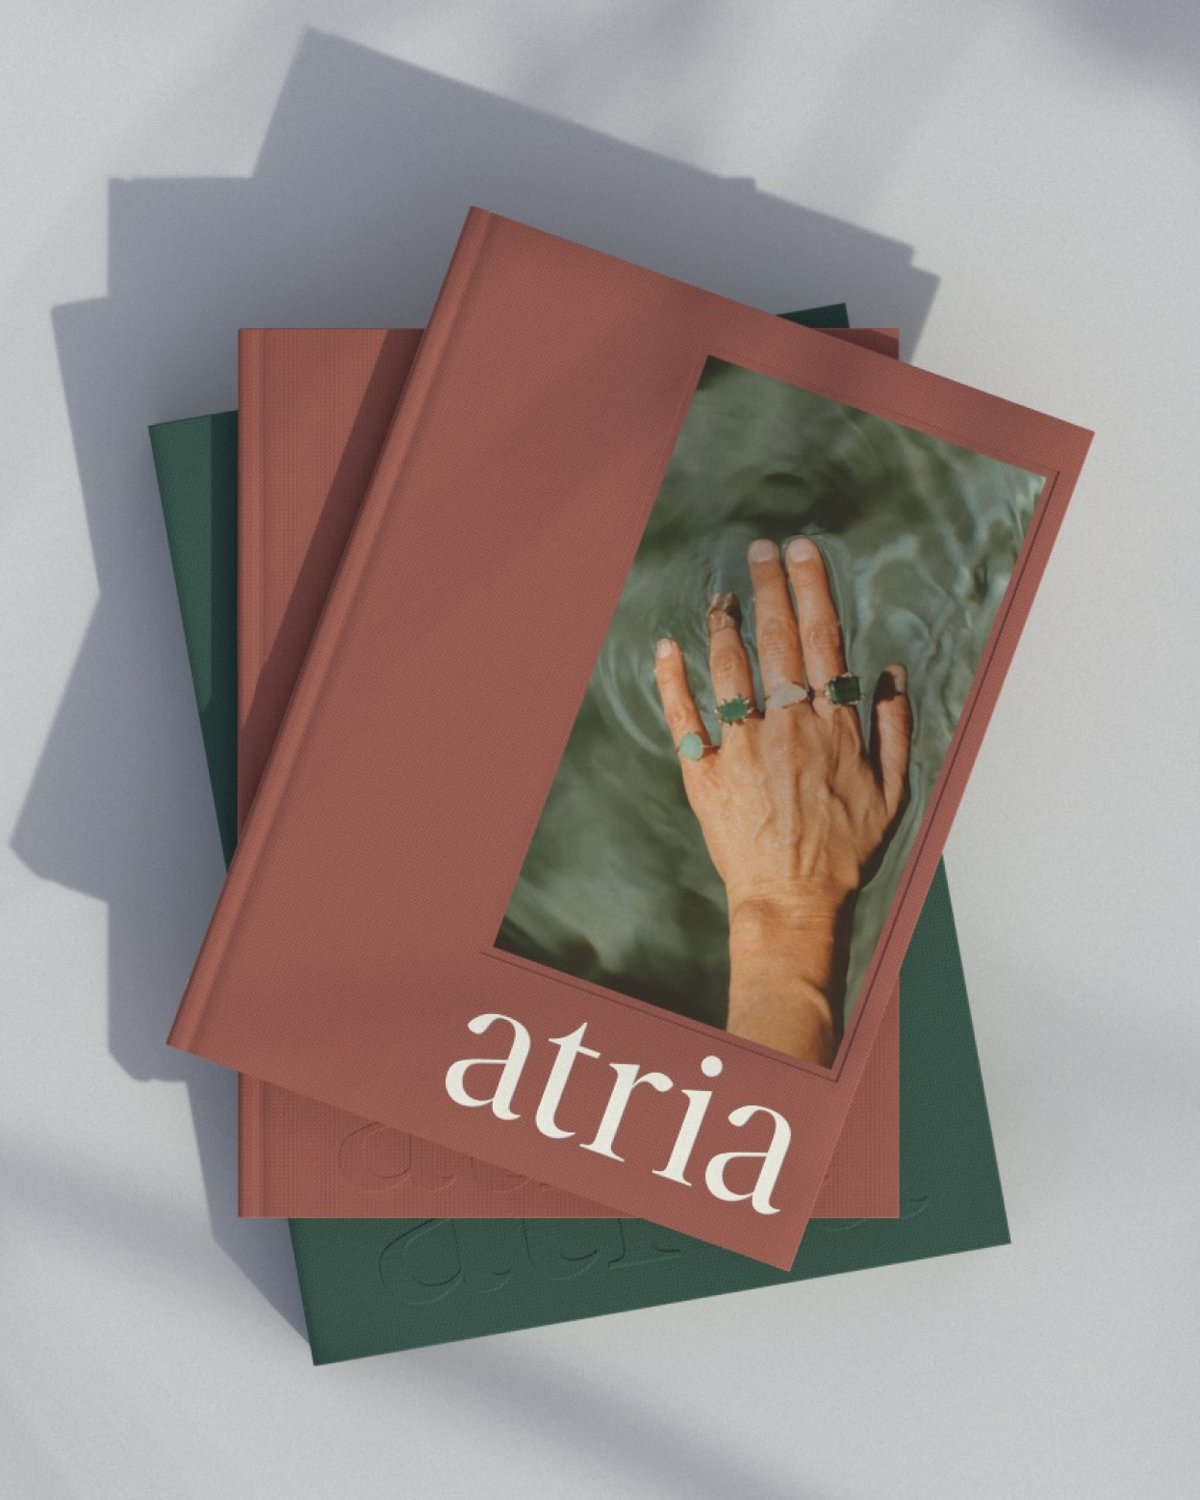 A stack of green and red Atria books with a hand in rippling water, on a grey background with shadows to create a calming energy